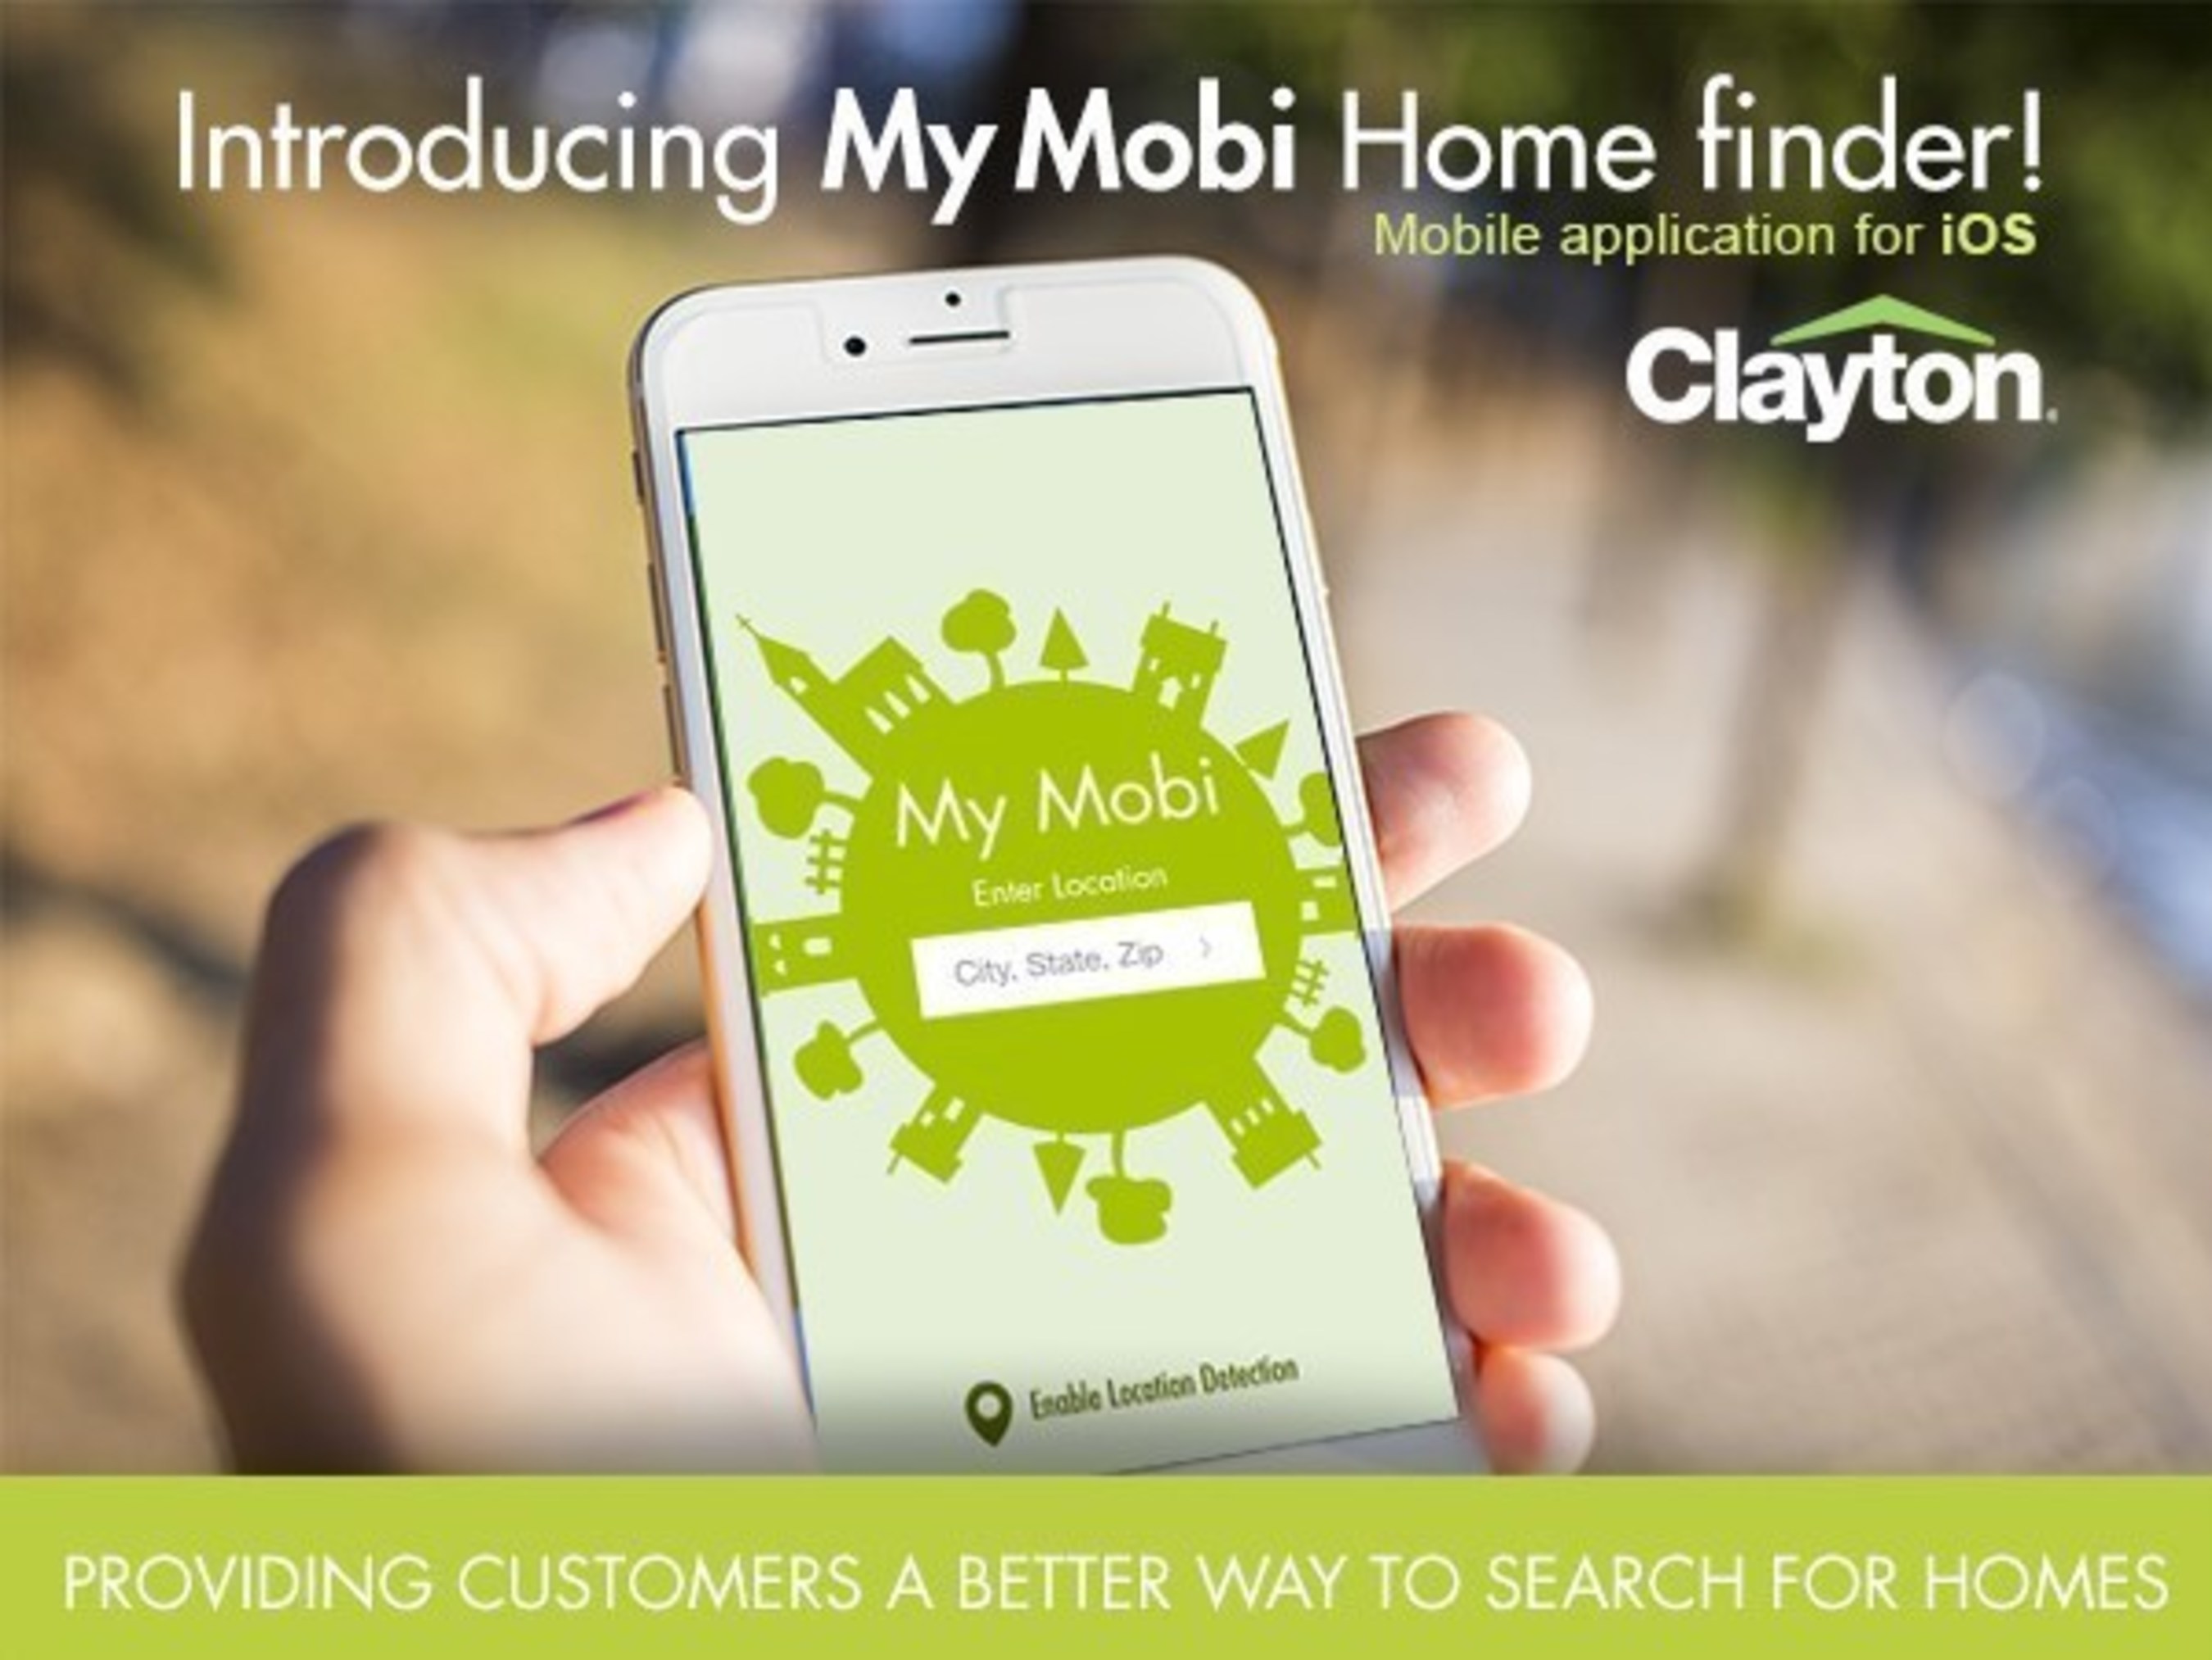 The MyMobi Home Finder app is now available for select smartphones.